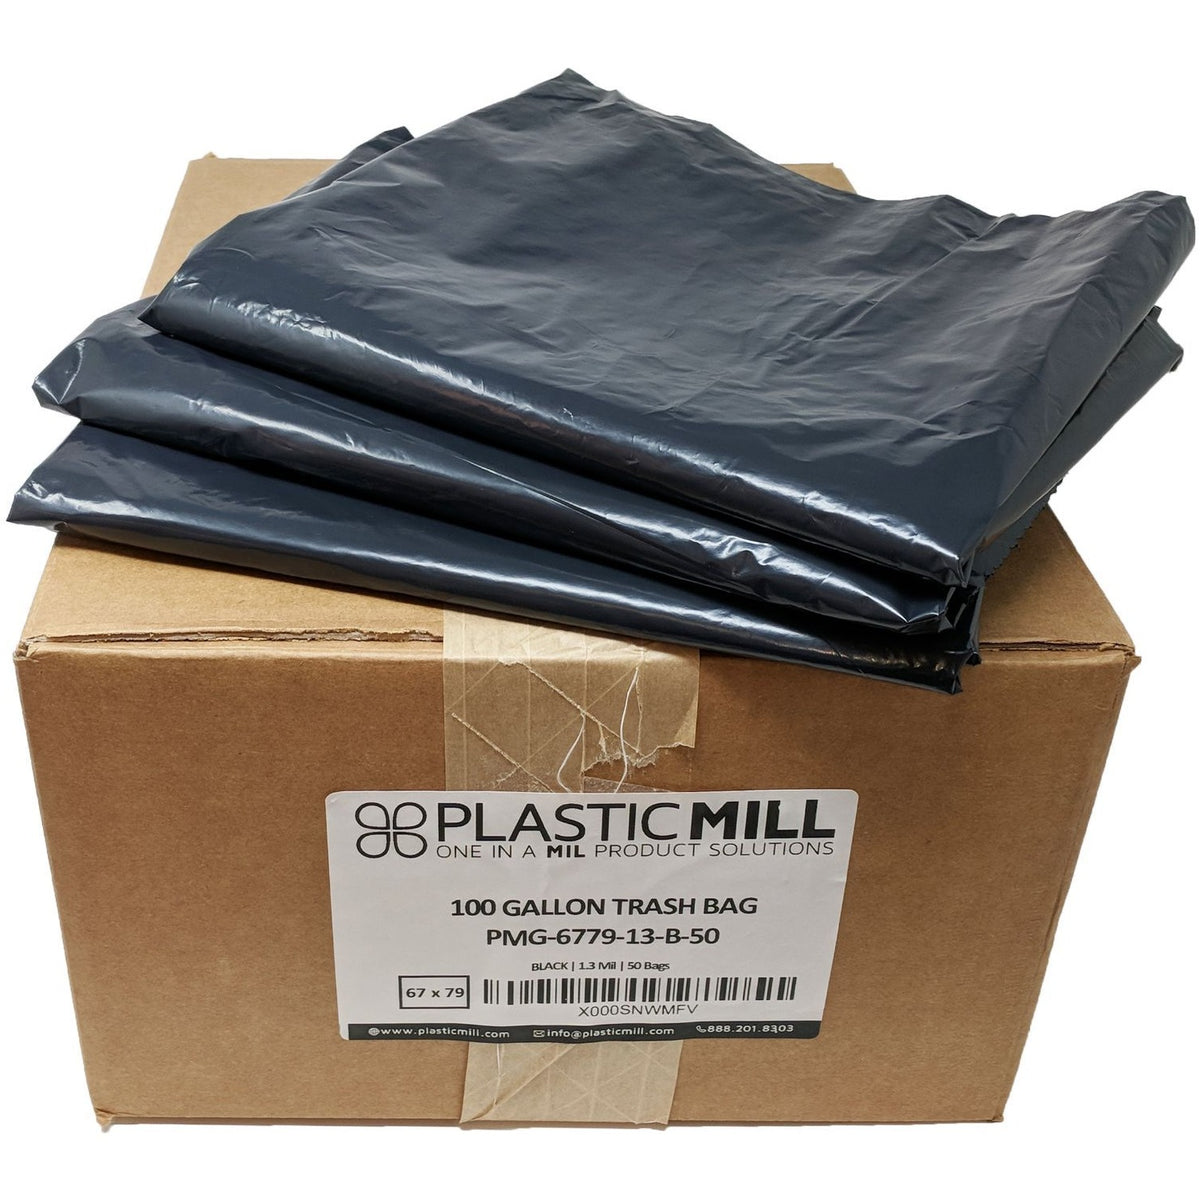 PlasticMill 100 Gallon Clear 3 Mil 67x79 25 Bags/Case Gang Folded Ultra Heavy Duty Garbage Bags / Trash Can Liners / Contractor Bags.